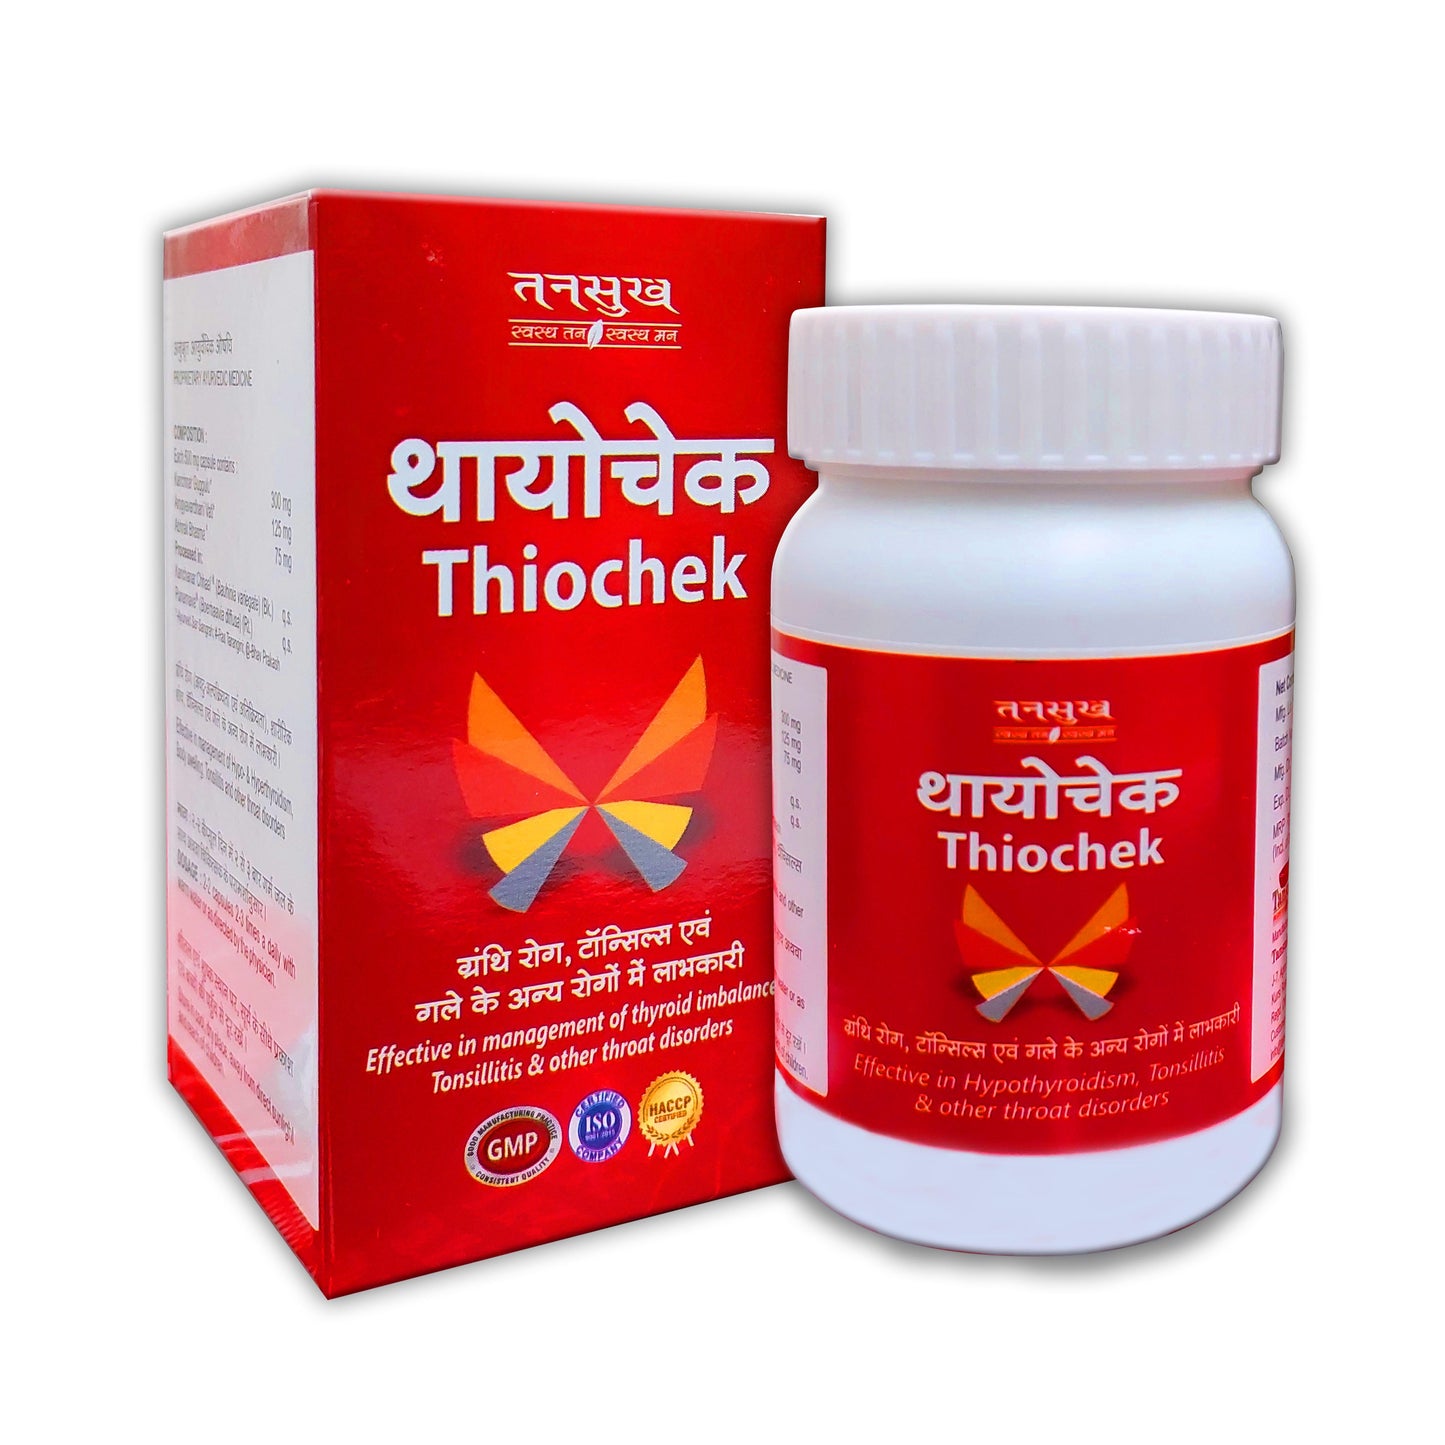 Tansukh Thiocheck Capsule Ayurvedic Medicine for Tonsils thyroid hyperthyoroid, Swelling Thorats Medicine, Tansukh Herbals, Thayochek